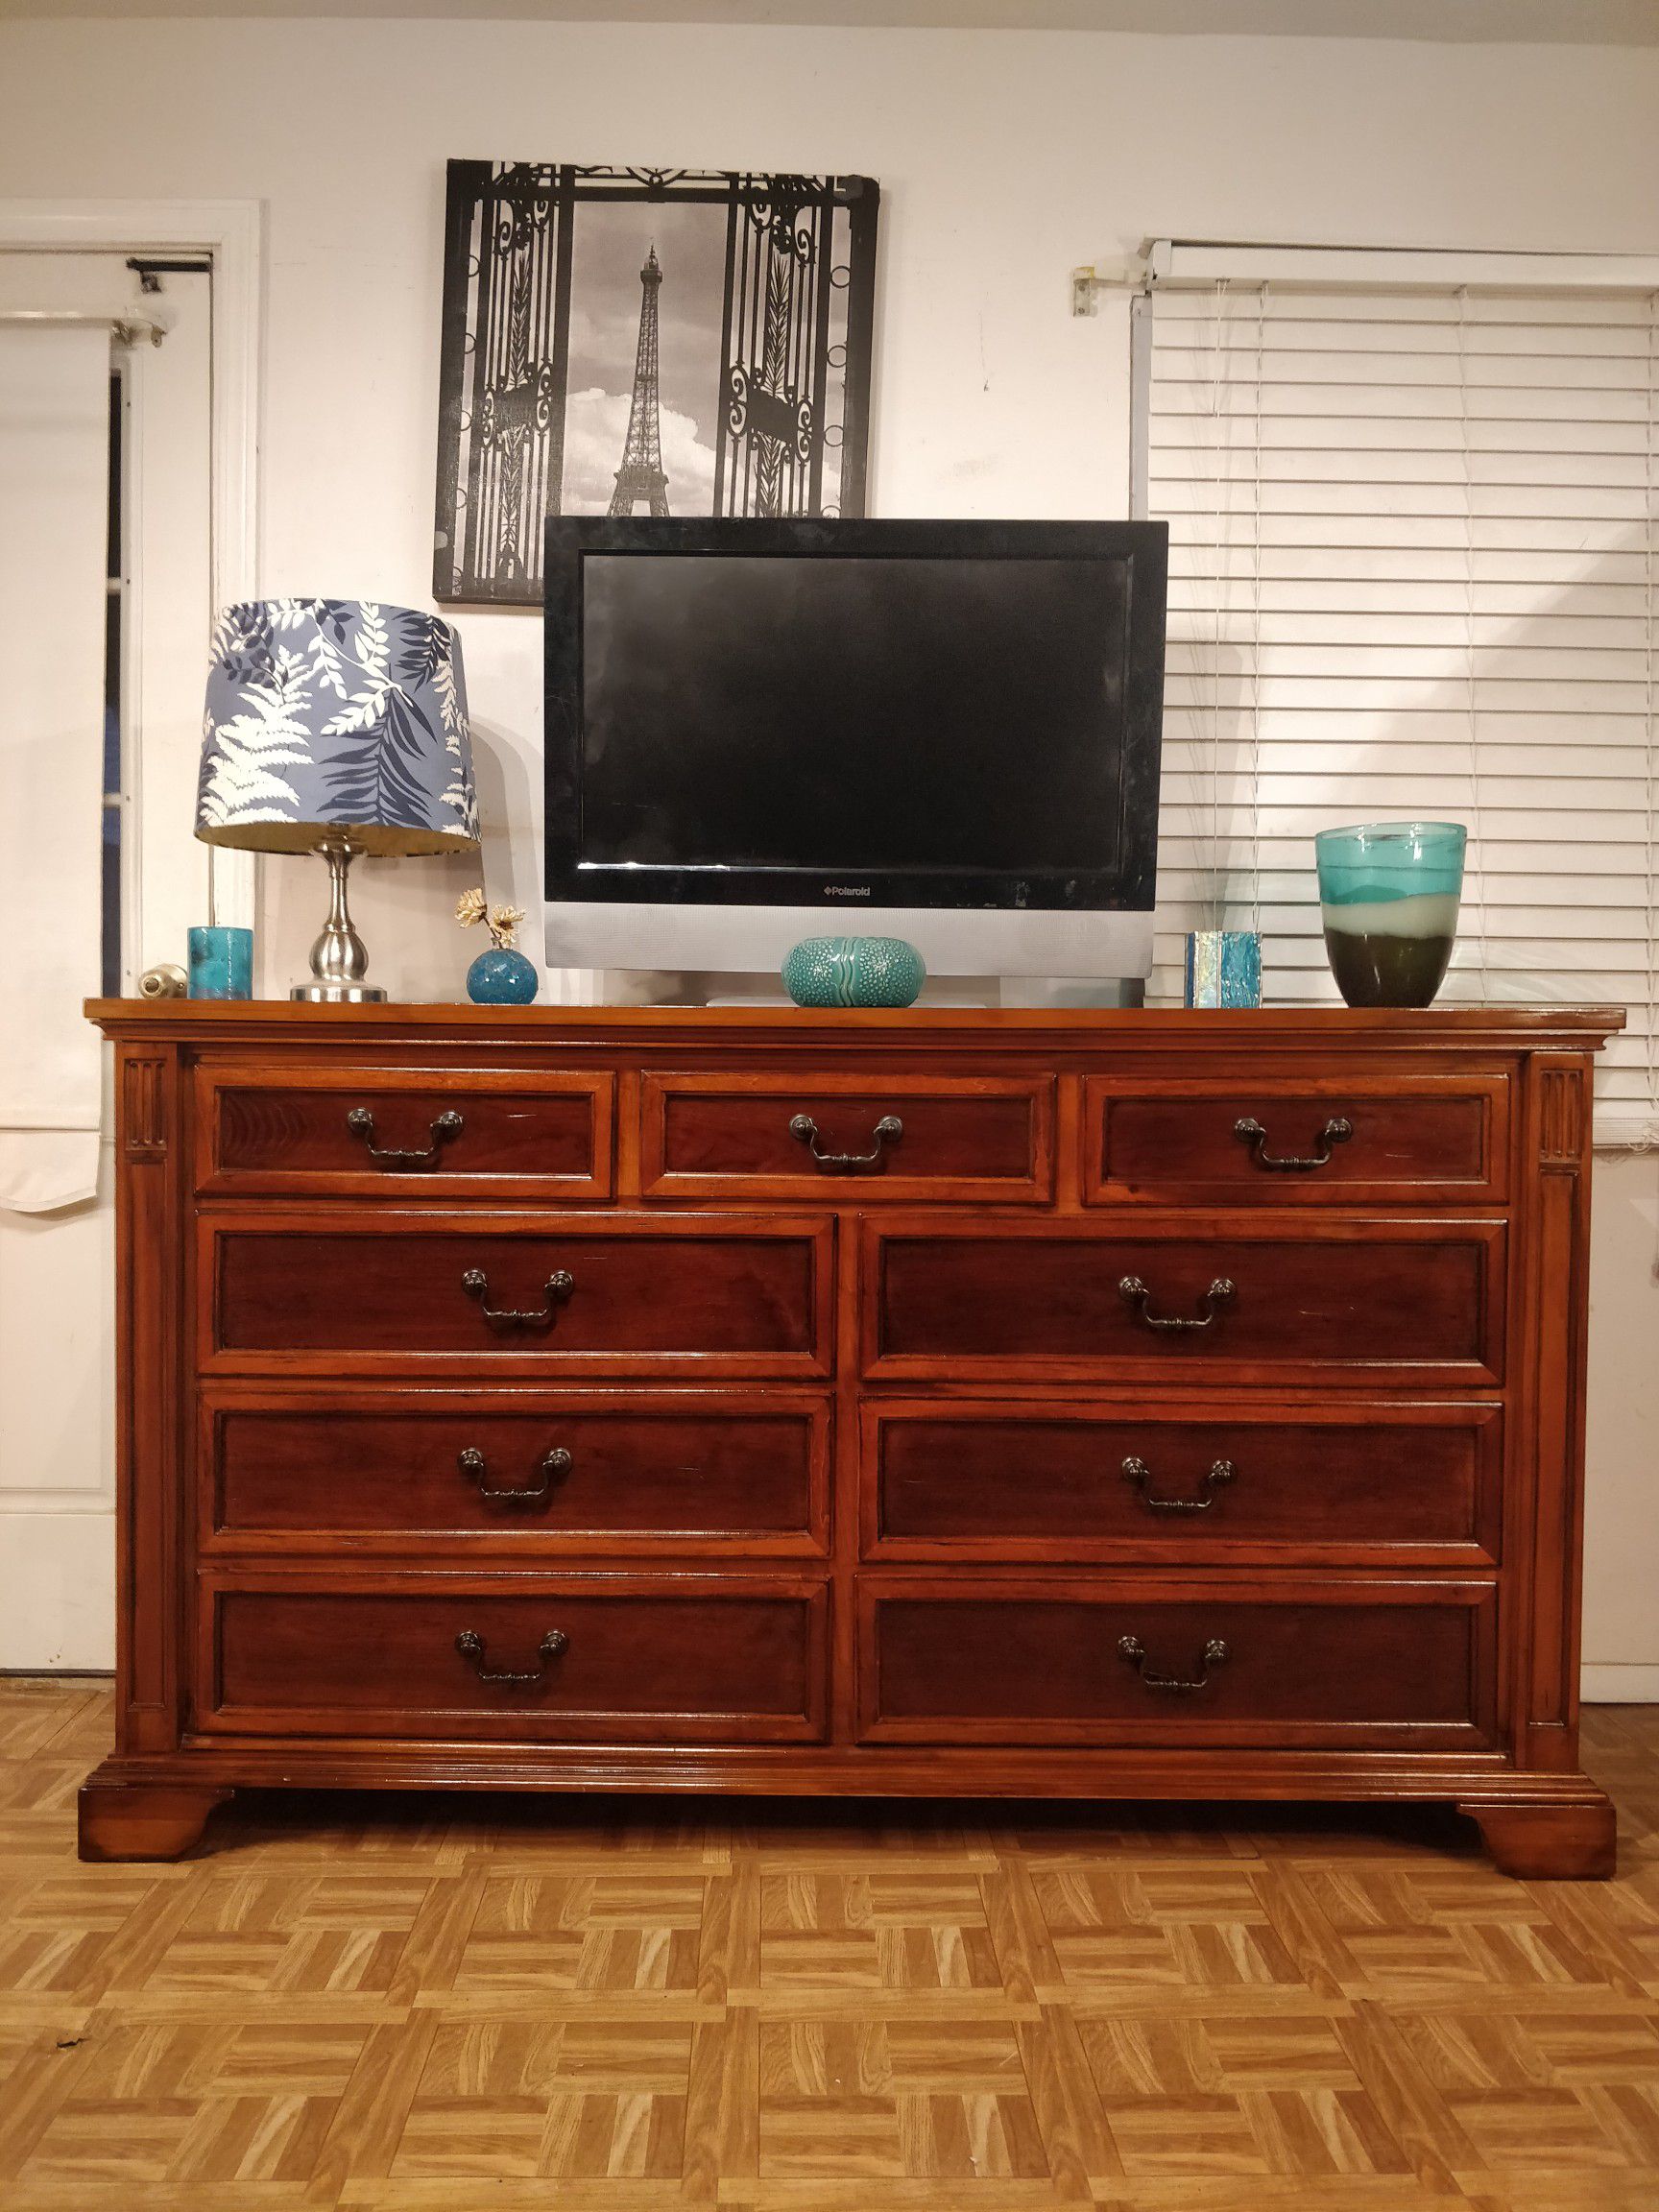 Solid wood UNIVERSAL FURNITURE big dresser/TV stand with 9 drawers in great condition all drawers working well, dovetail drawers. L68"*W19"*H38.5"